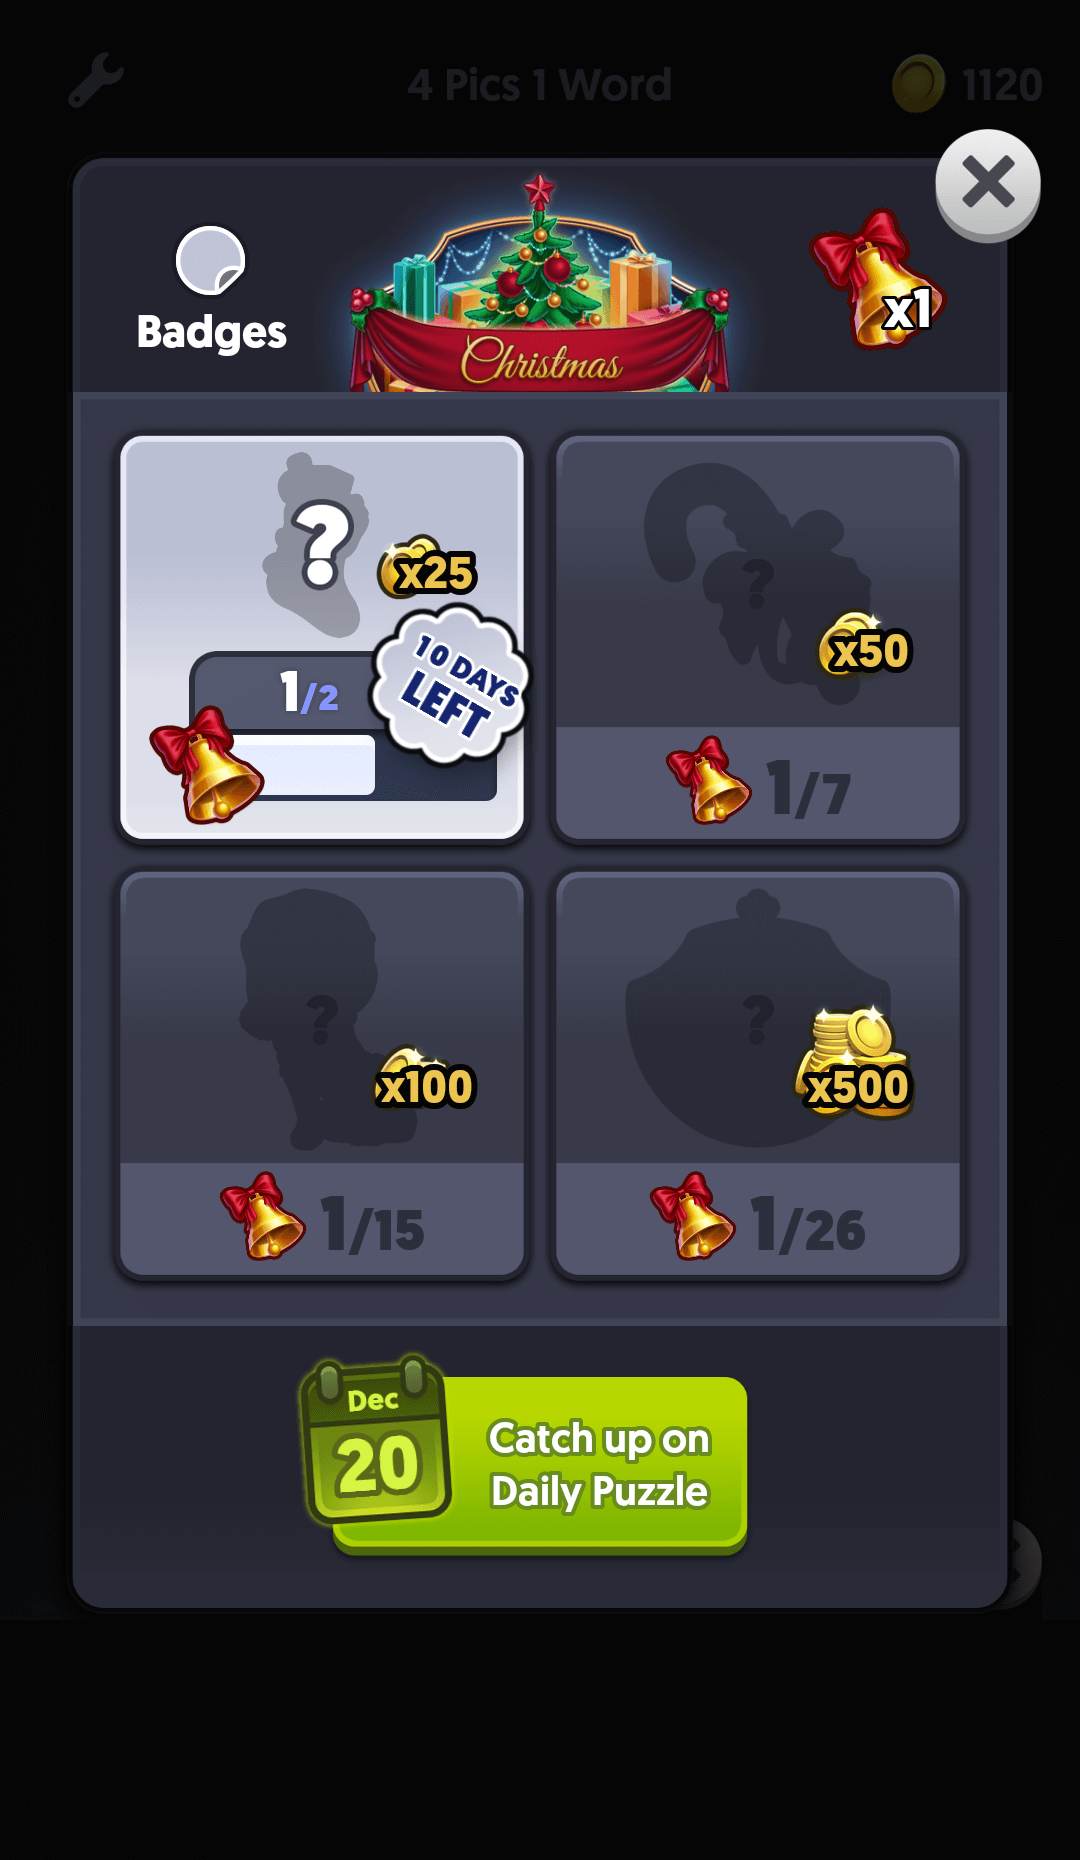 4 Pics 1 Word Login Daily To Get Prize